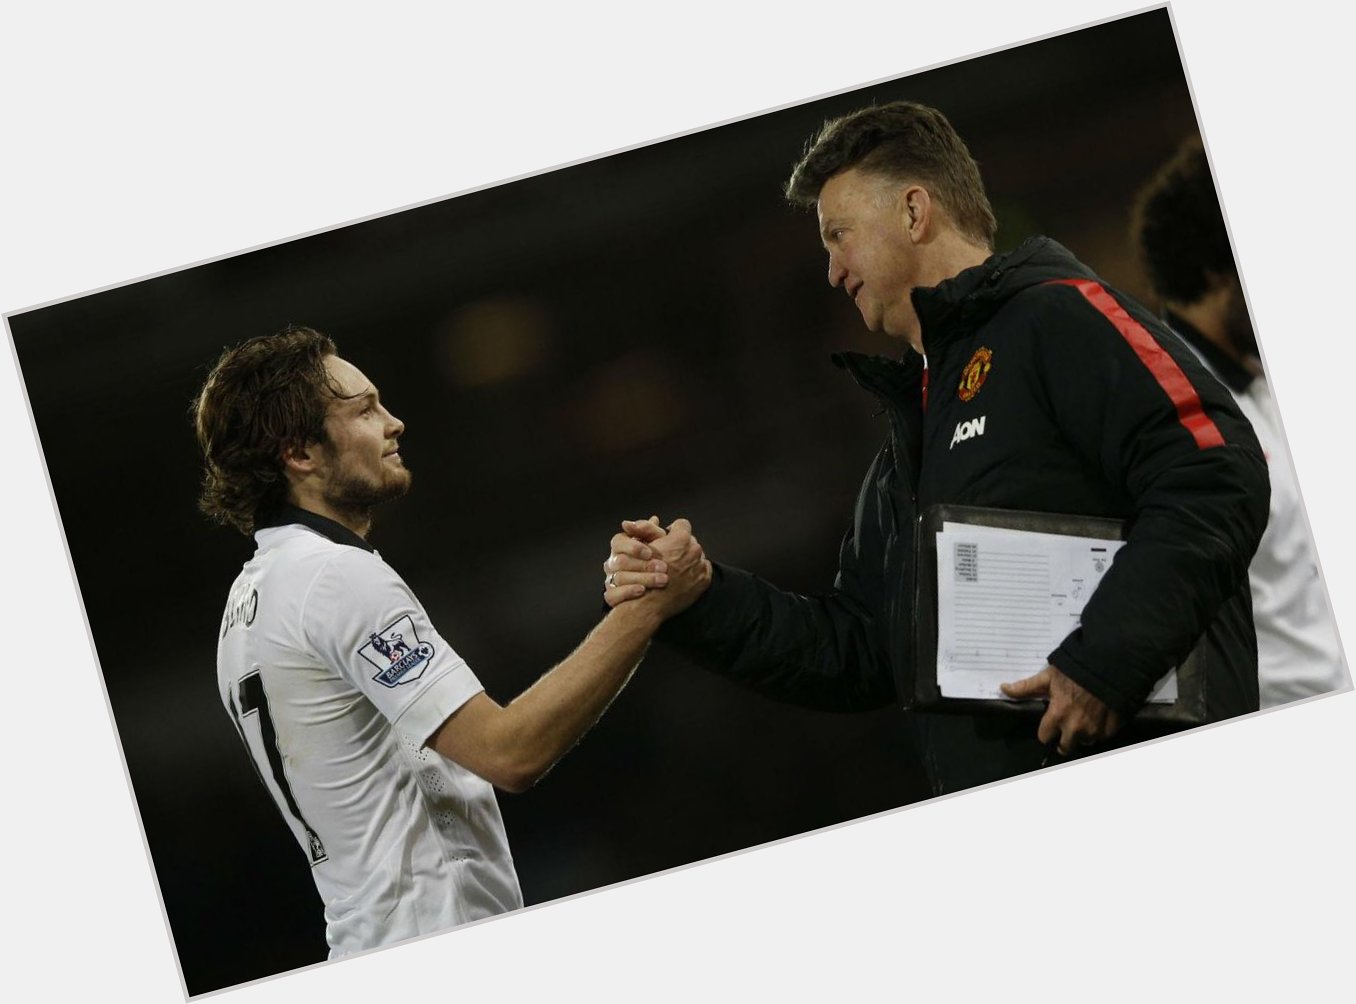 Happy birthday, Daley Blind! The Man United midfielder is 25. Will he be celebrating after tonight\s game vs Arsenal? 